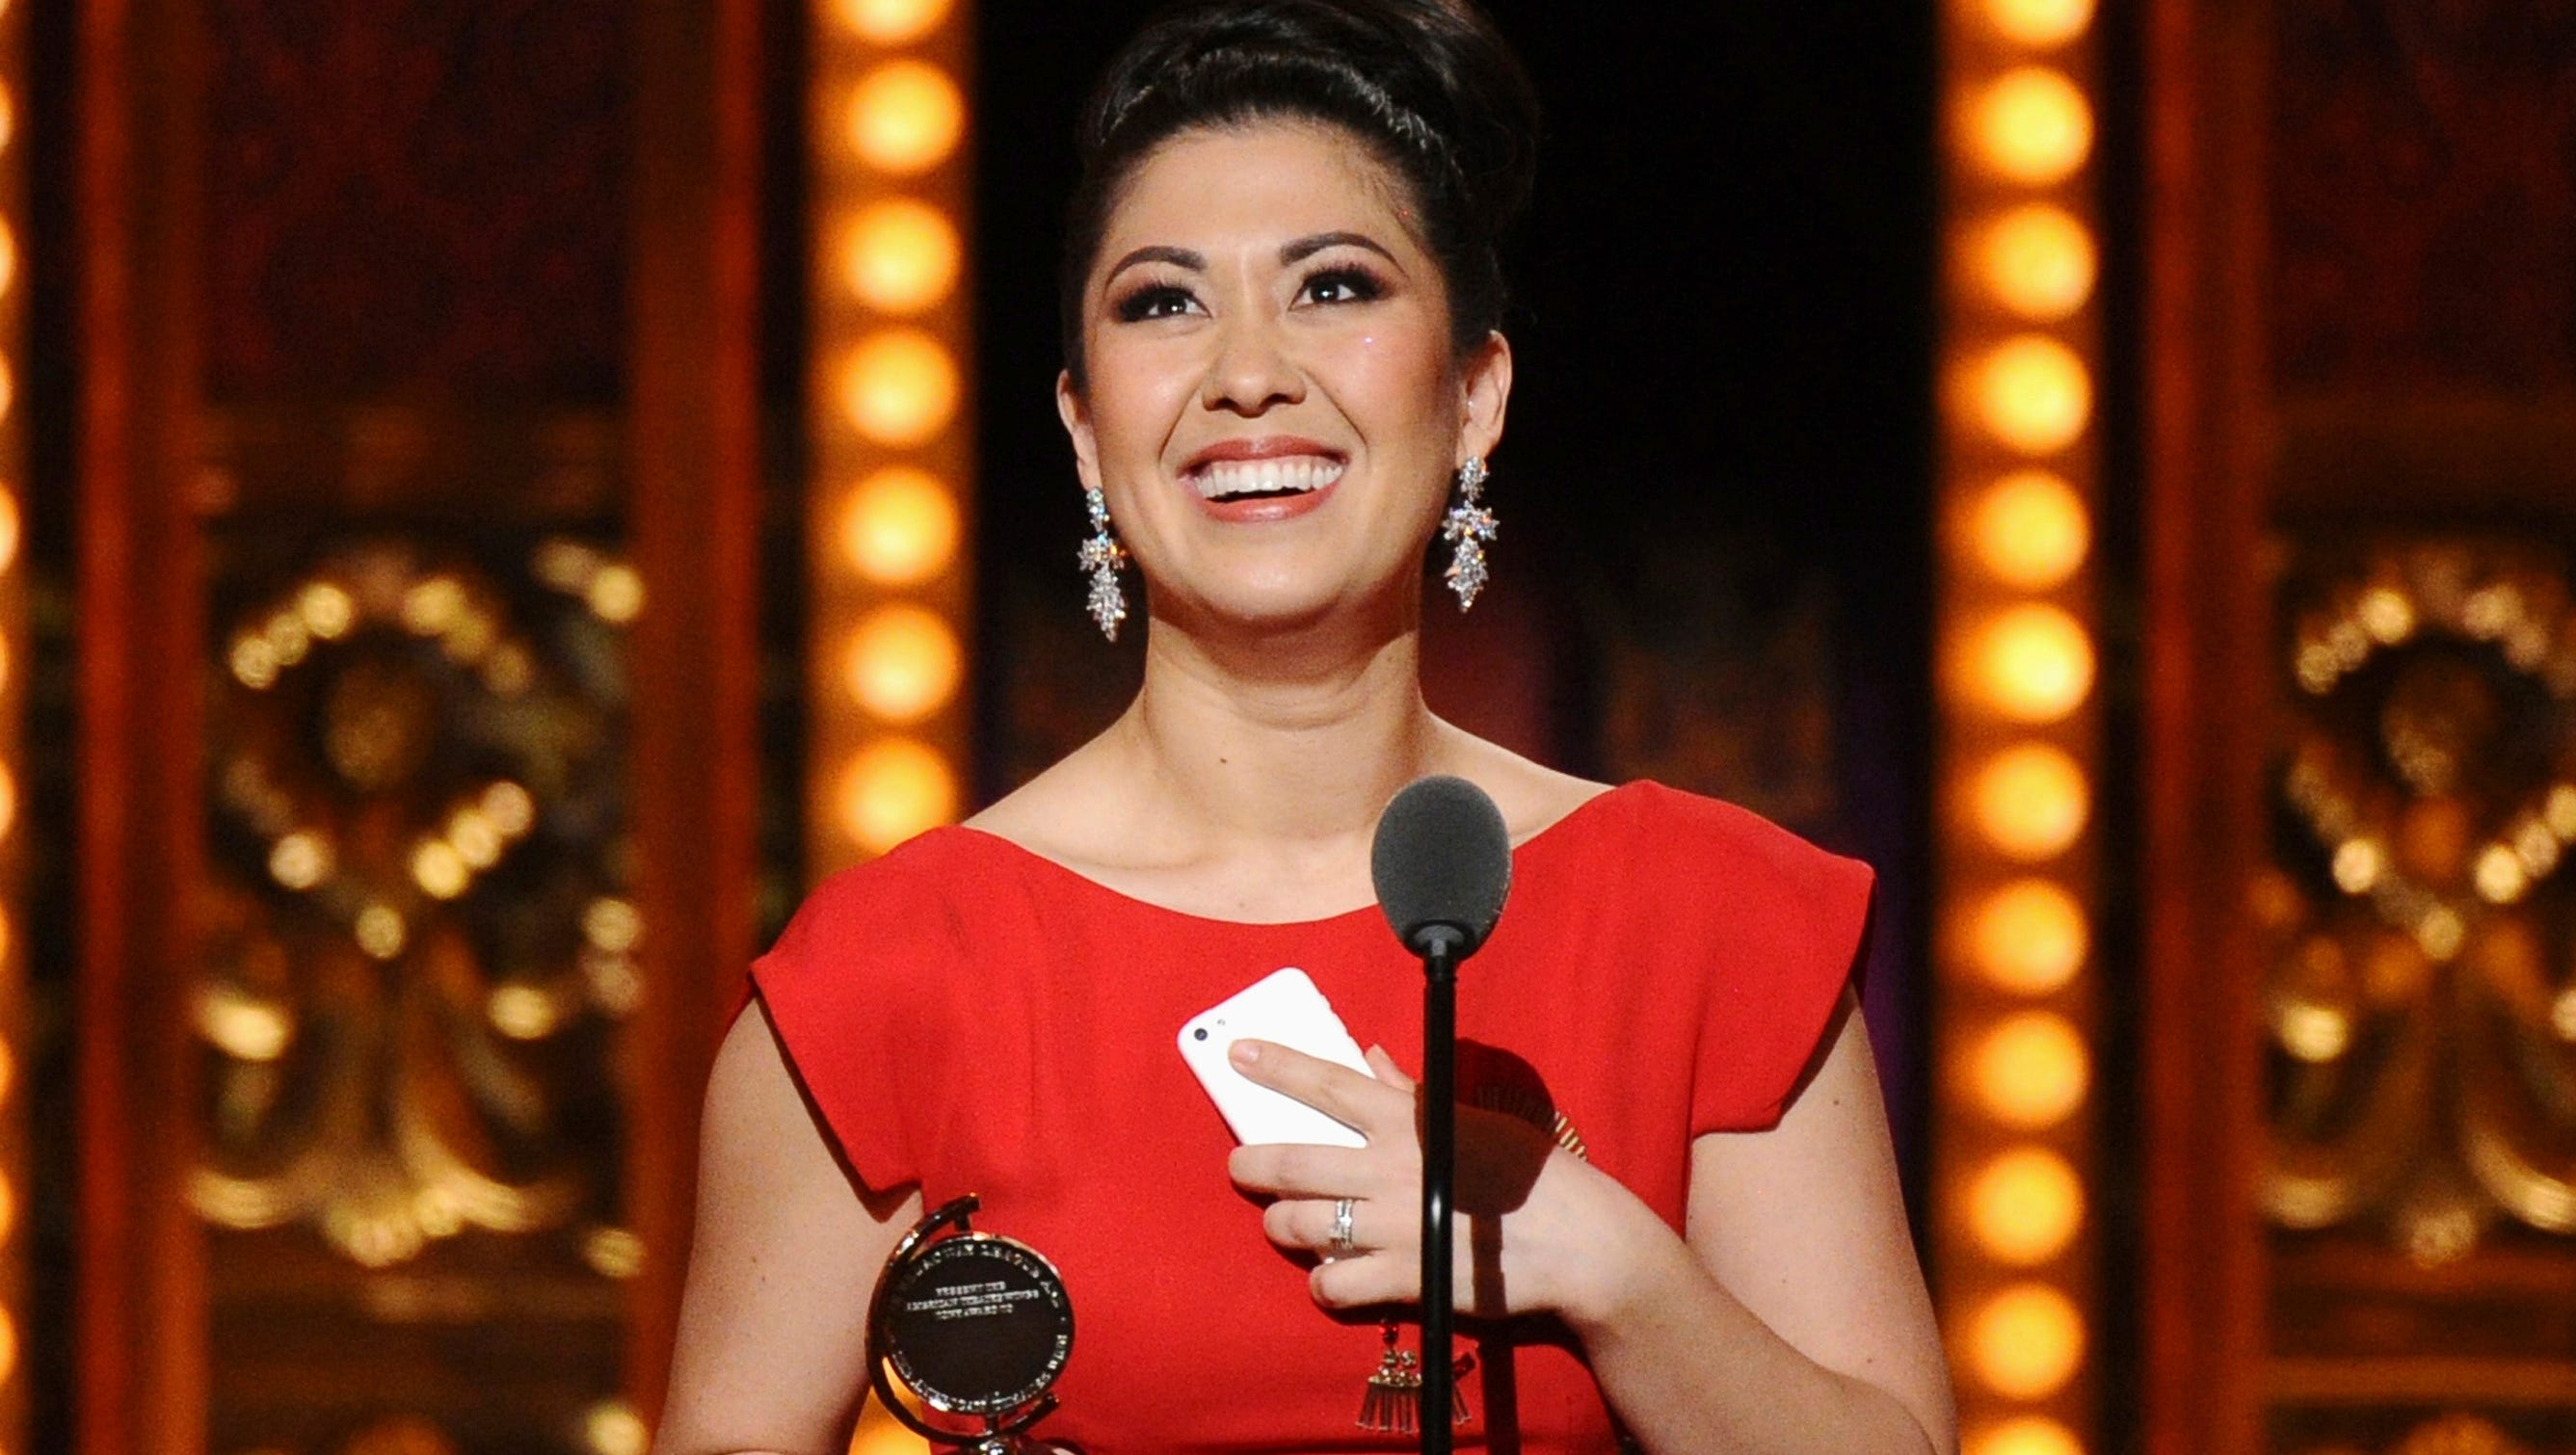 Broadways Ruthie Ann Miles Is Pregnant After Losing Daughter In 2018 